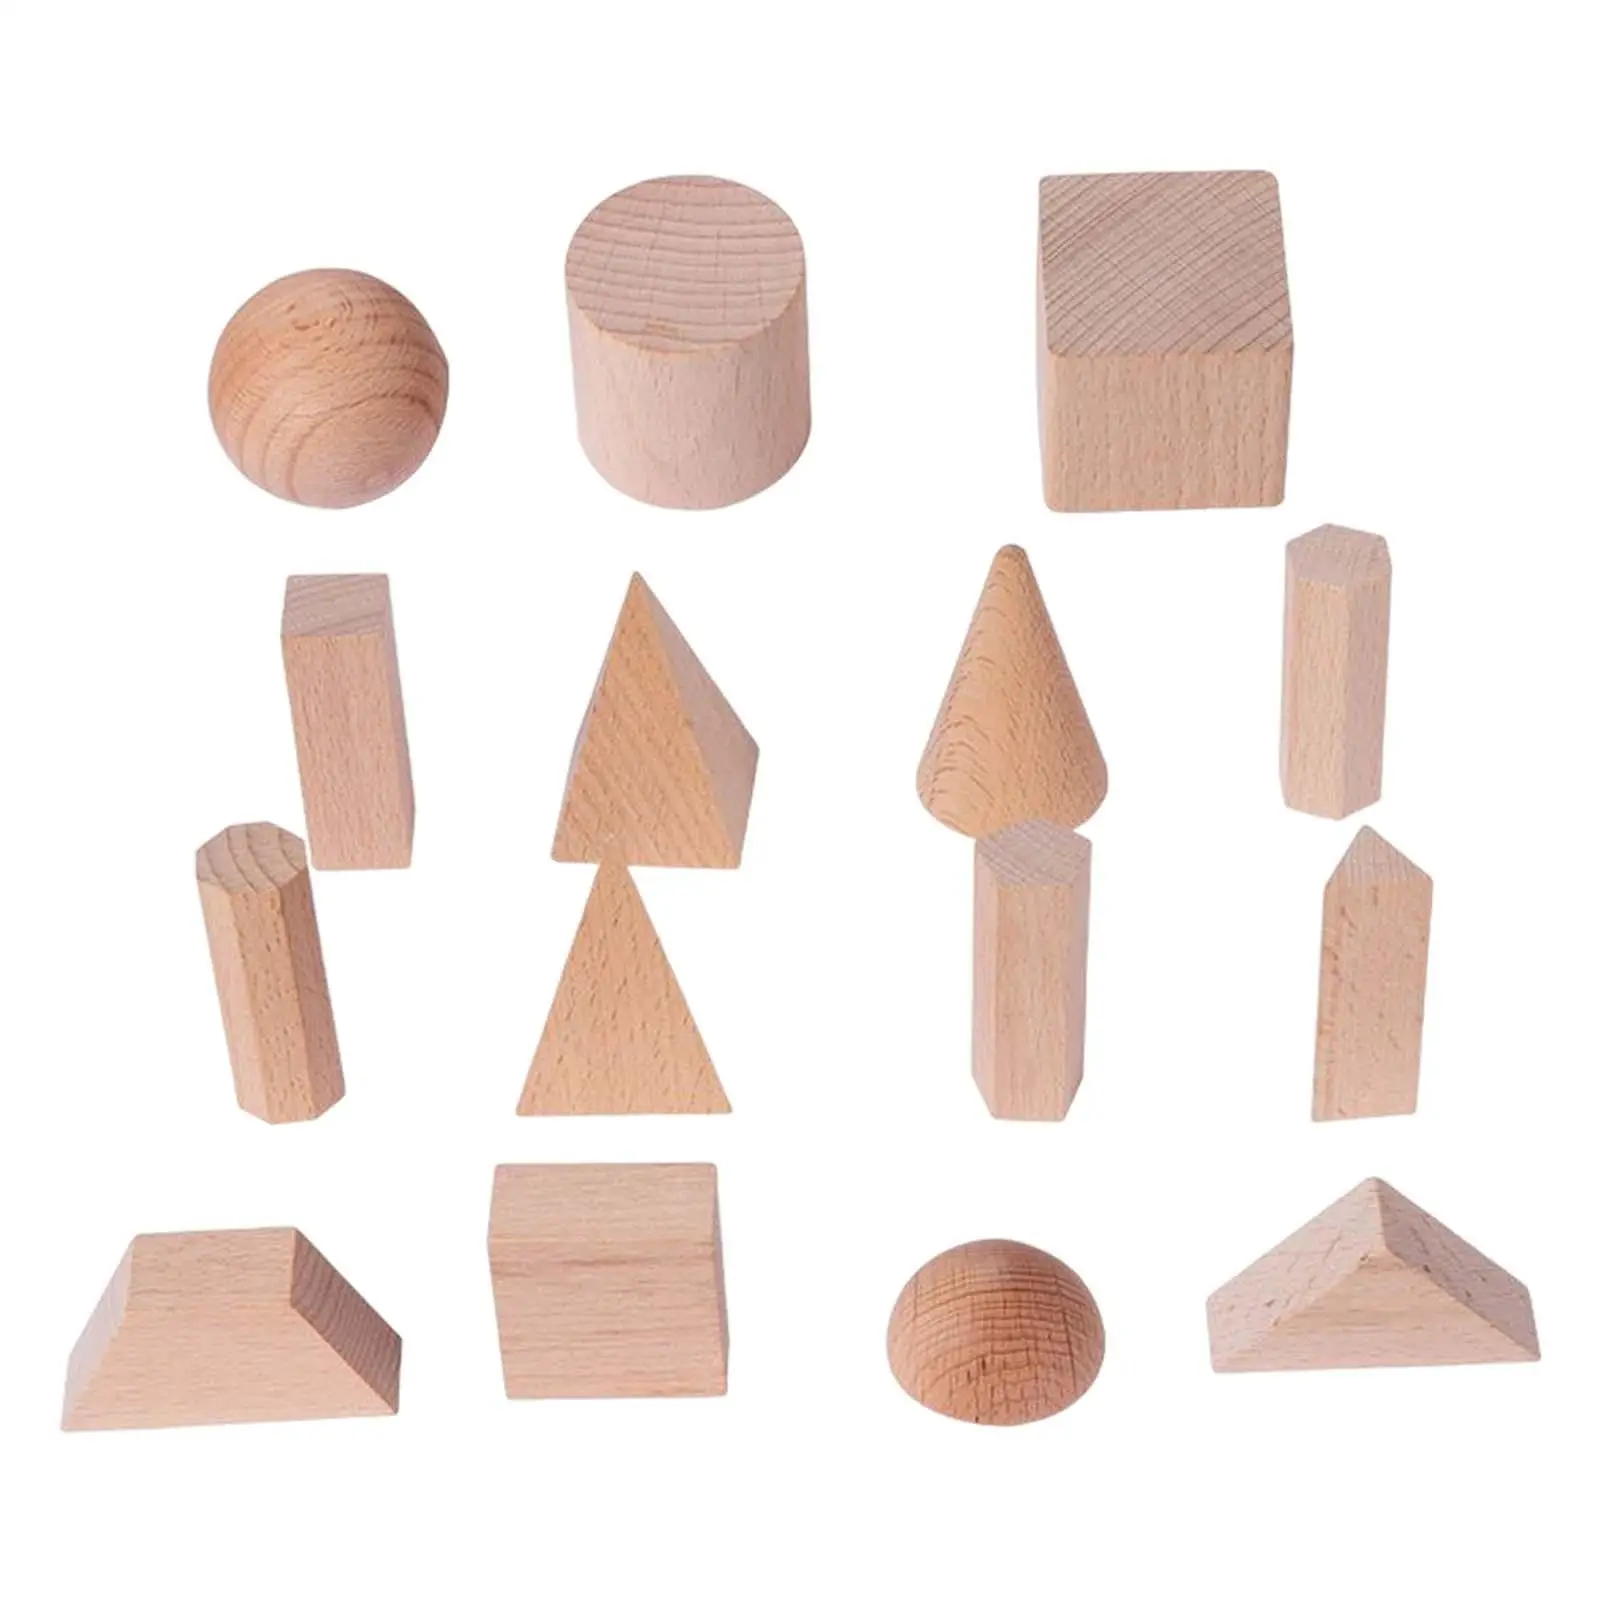 15x Wood Geometric Solids,Learning Education Math Toys,Montessori 3D Shapes Stacking Toy for Toddler Ages 2+